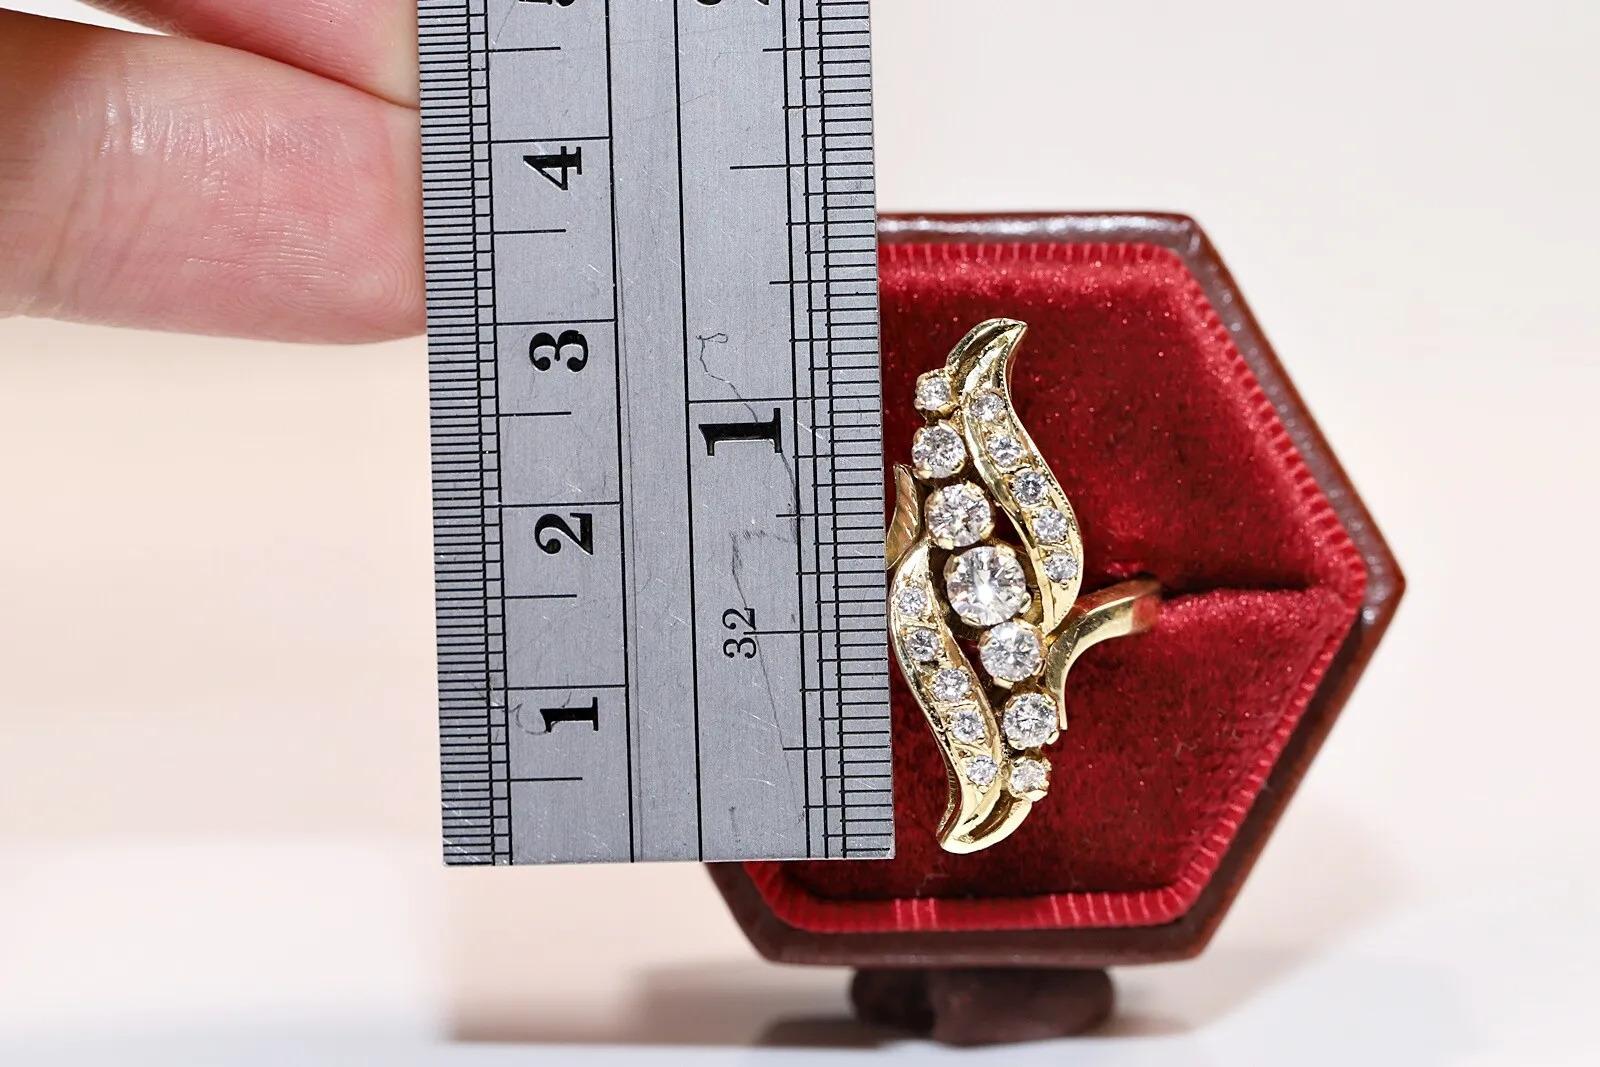 In very good condition.
Total weight is 8.9 grams.
Totally is diamond  about 1 carat.
The diamond is has  G-H color and vs-s1 clarity.
Ring size is US 7 (We offer free resizing)
We can make any size.
Box is not included.
Please contact for any